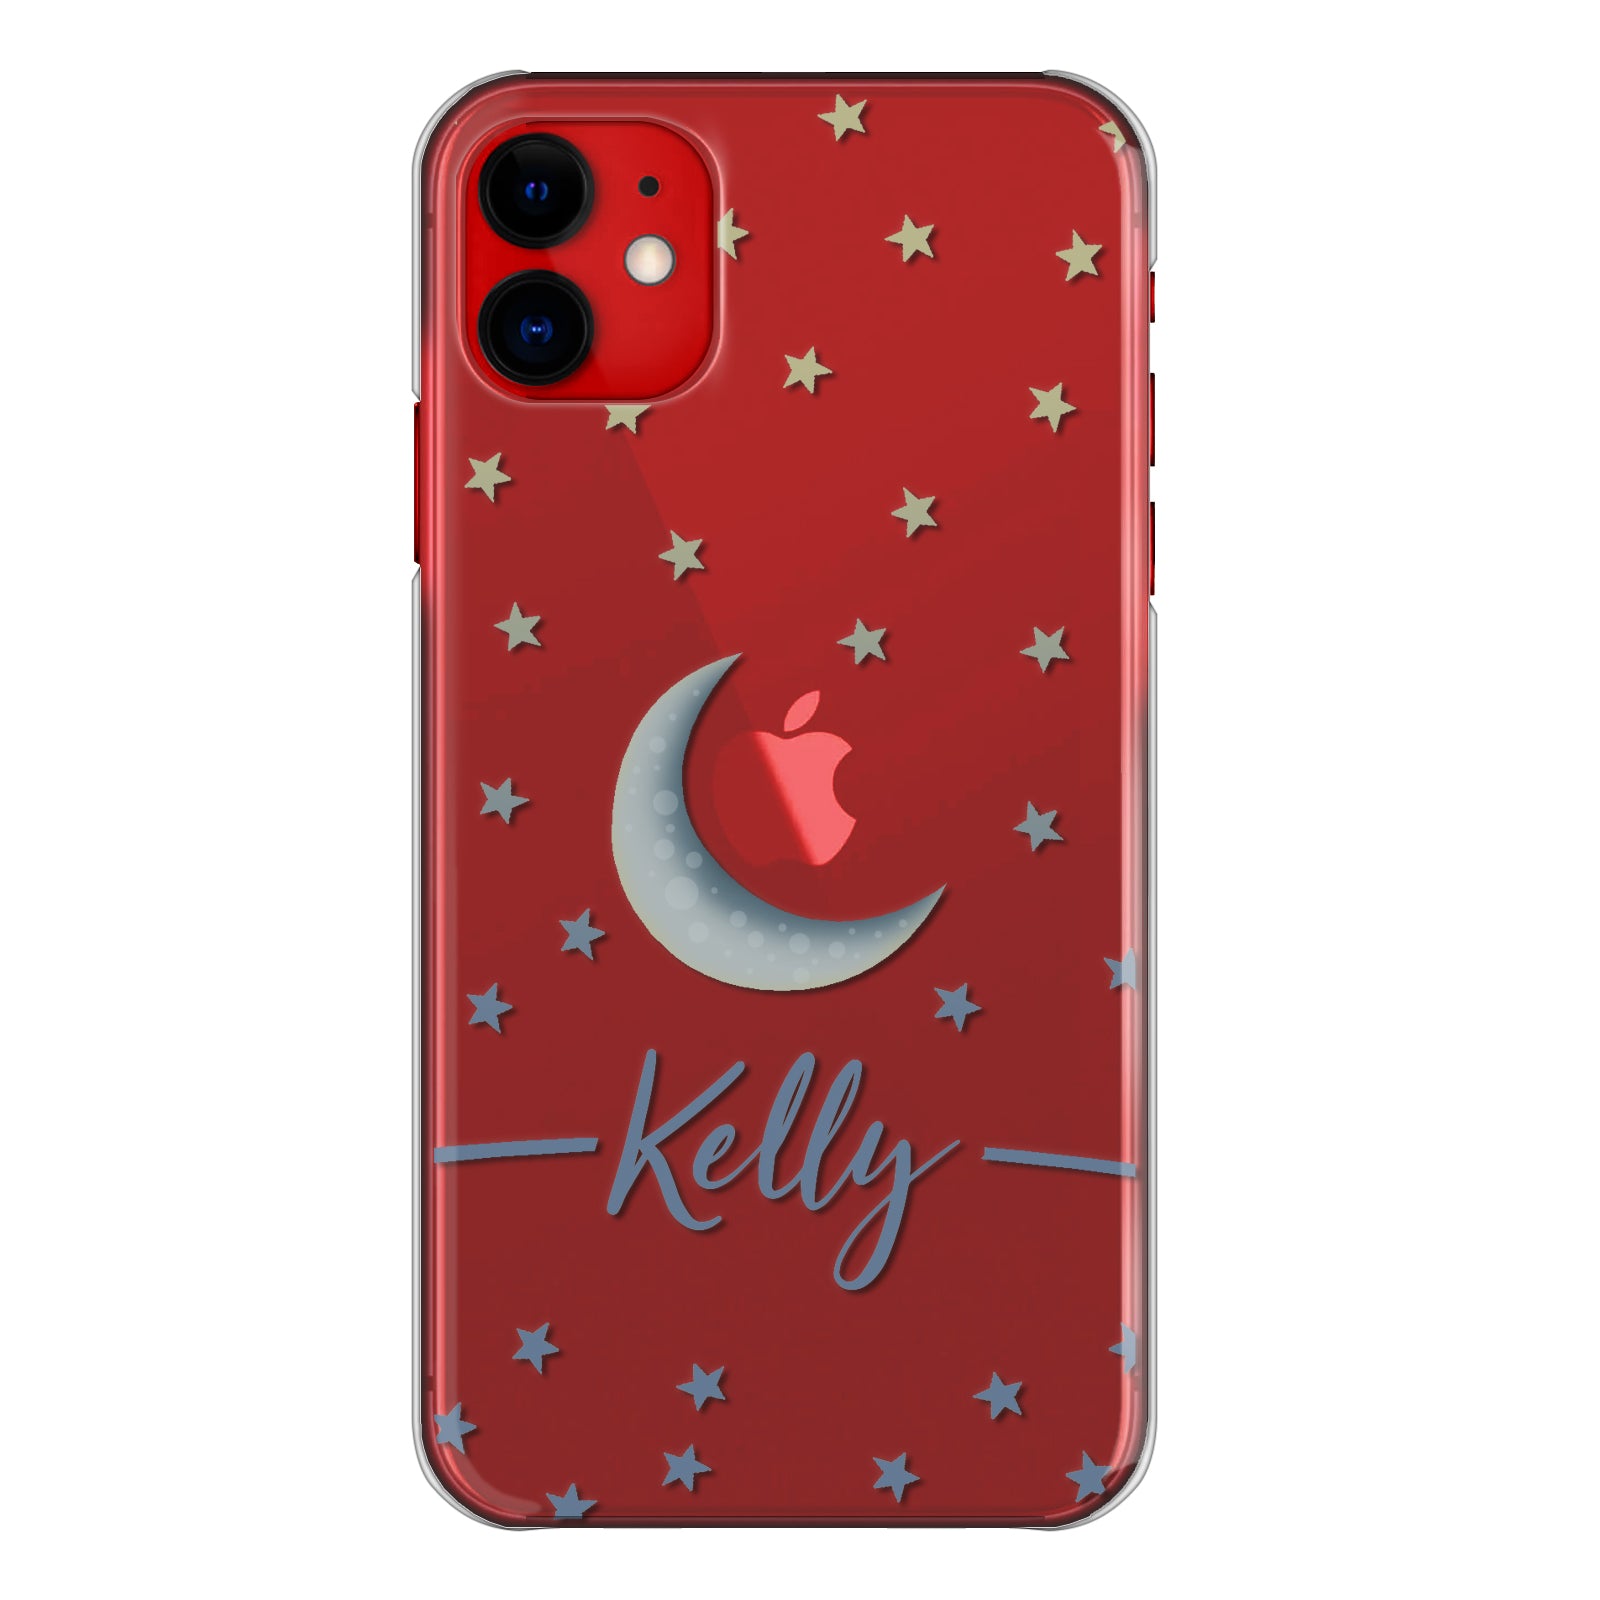 Personalised Motorola Phone Hard Case with Crescent Moon, Stars and Stylish Grey Text